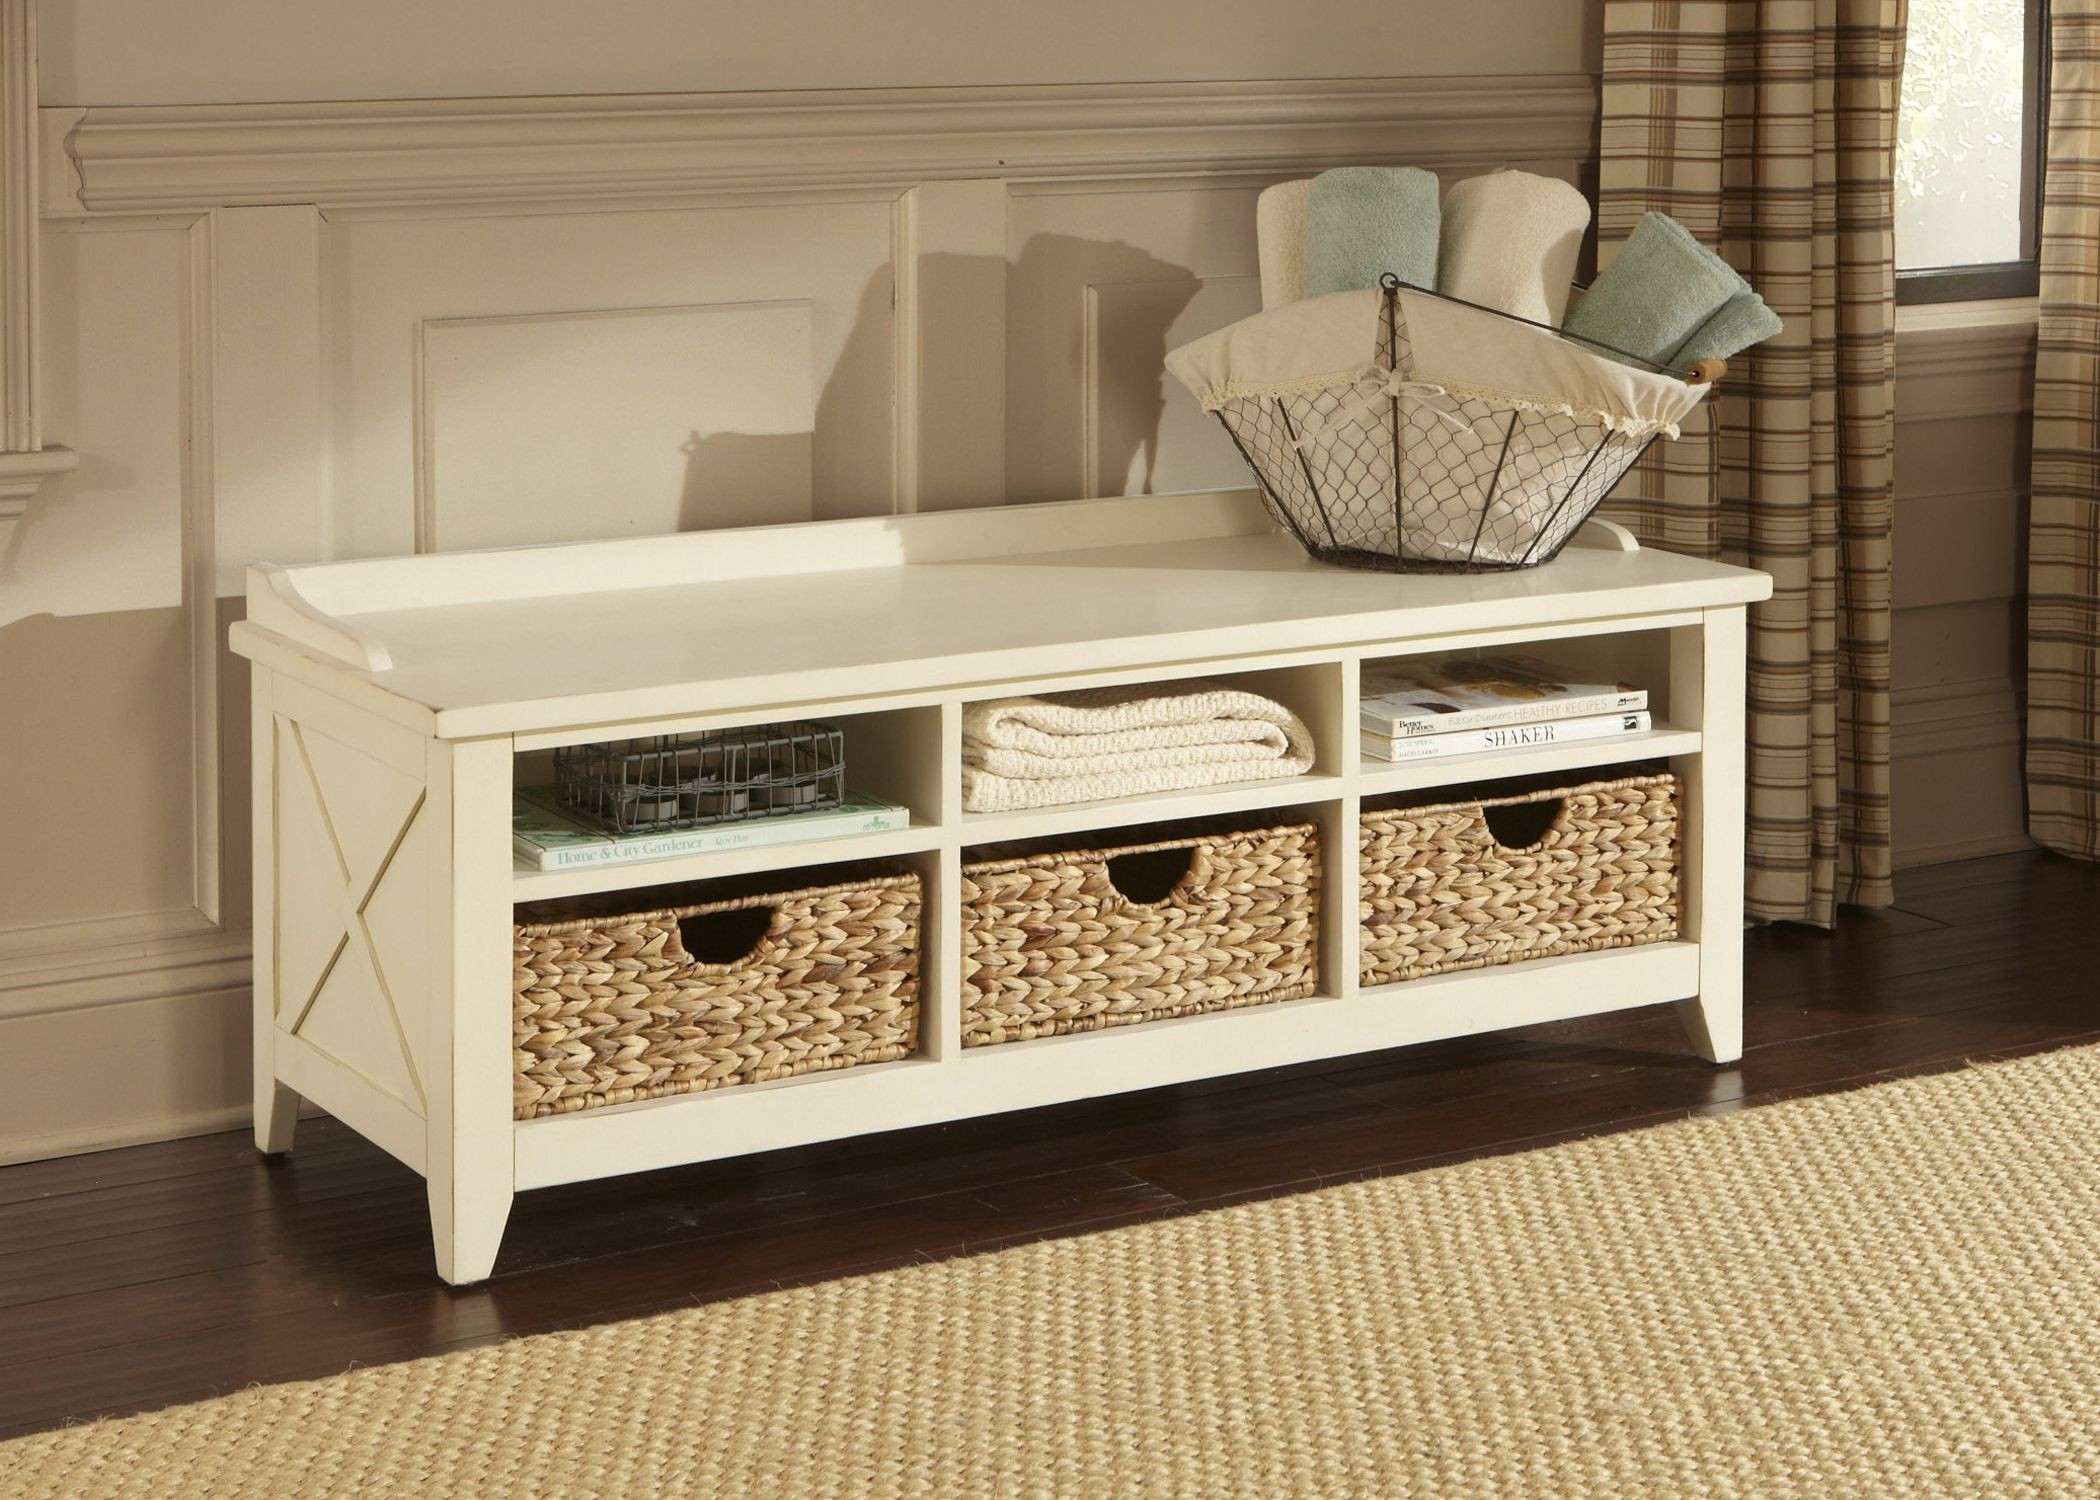 Cubby Storage Bench
 Hearthstone Rustic White Cubby Storage Bench from Liberty